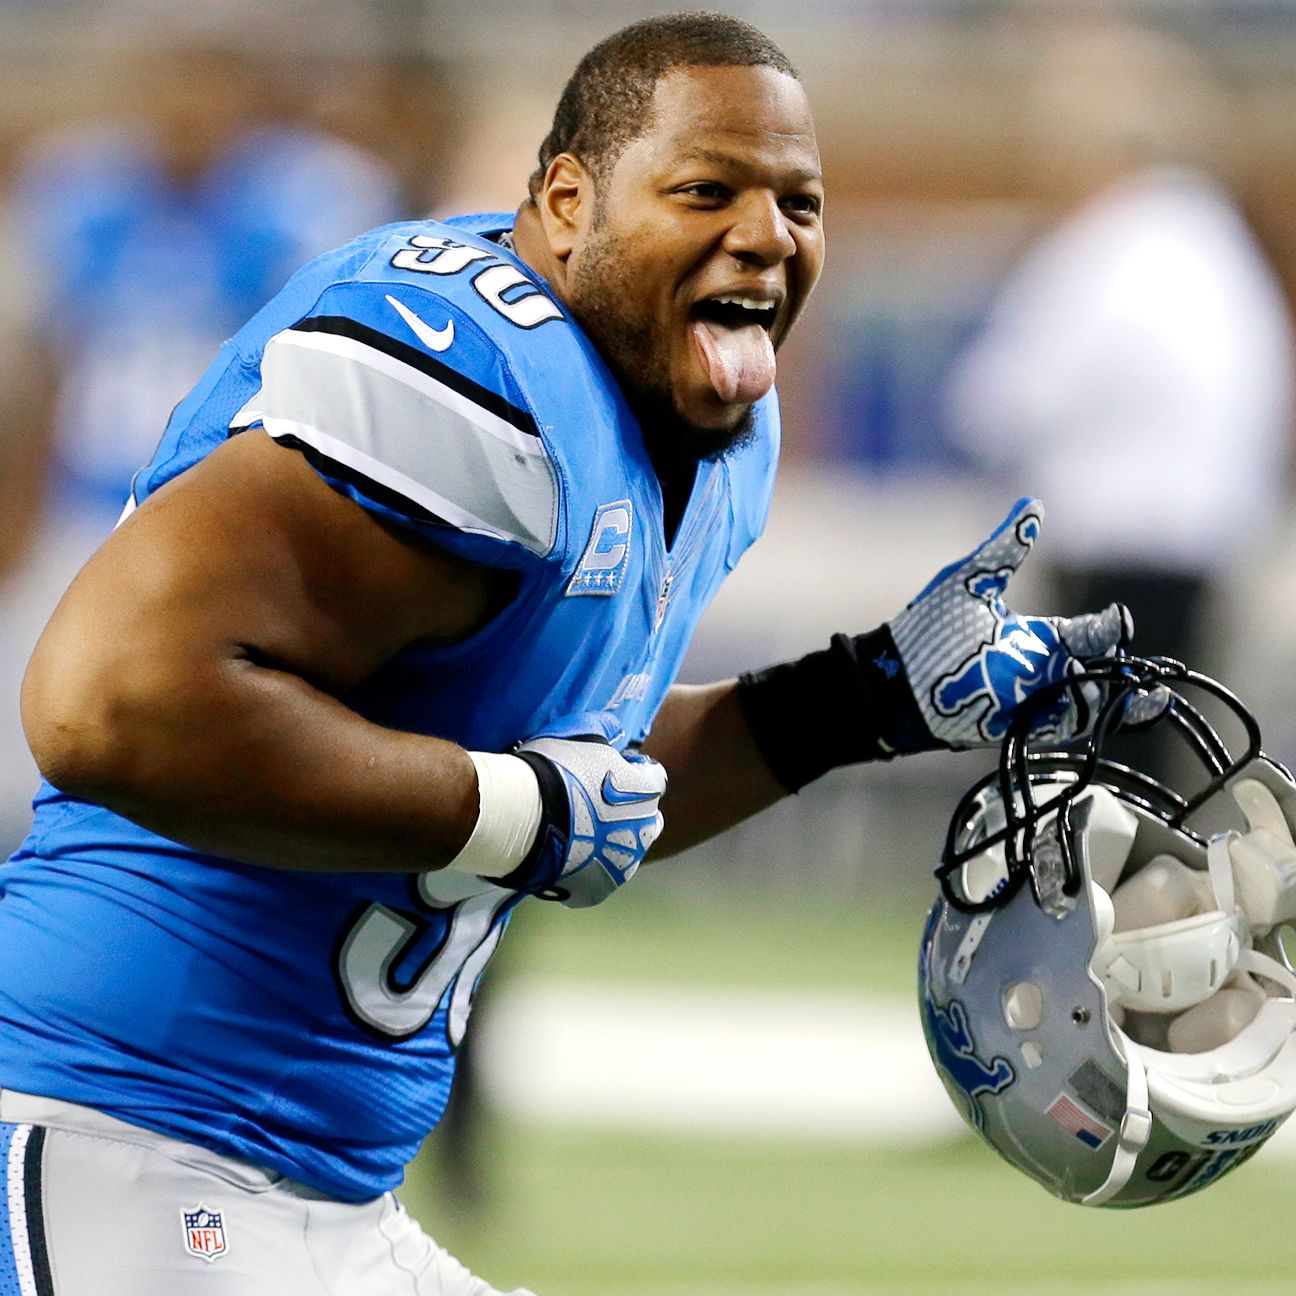 Ndamukong Suh of Detroit Lions wins appeal, will play in playoff game